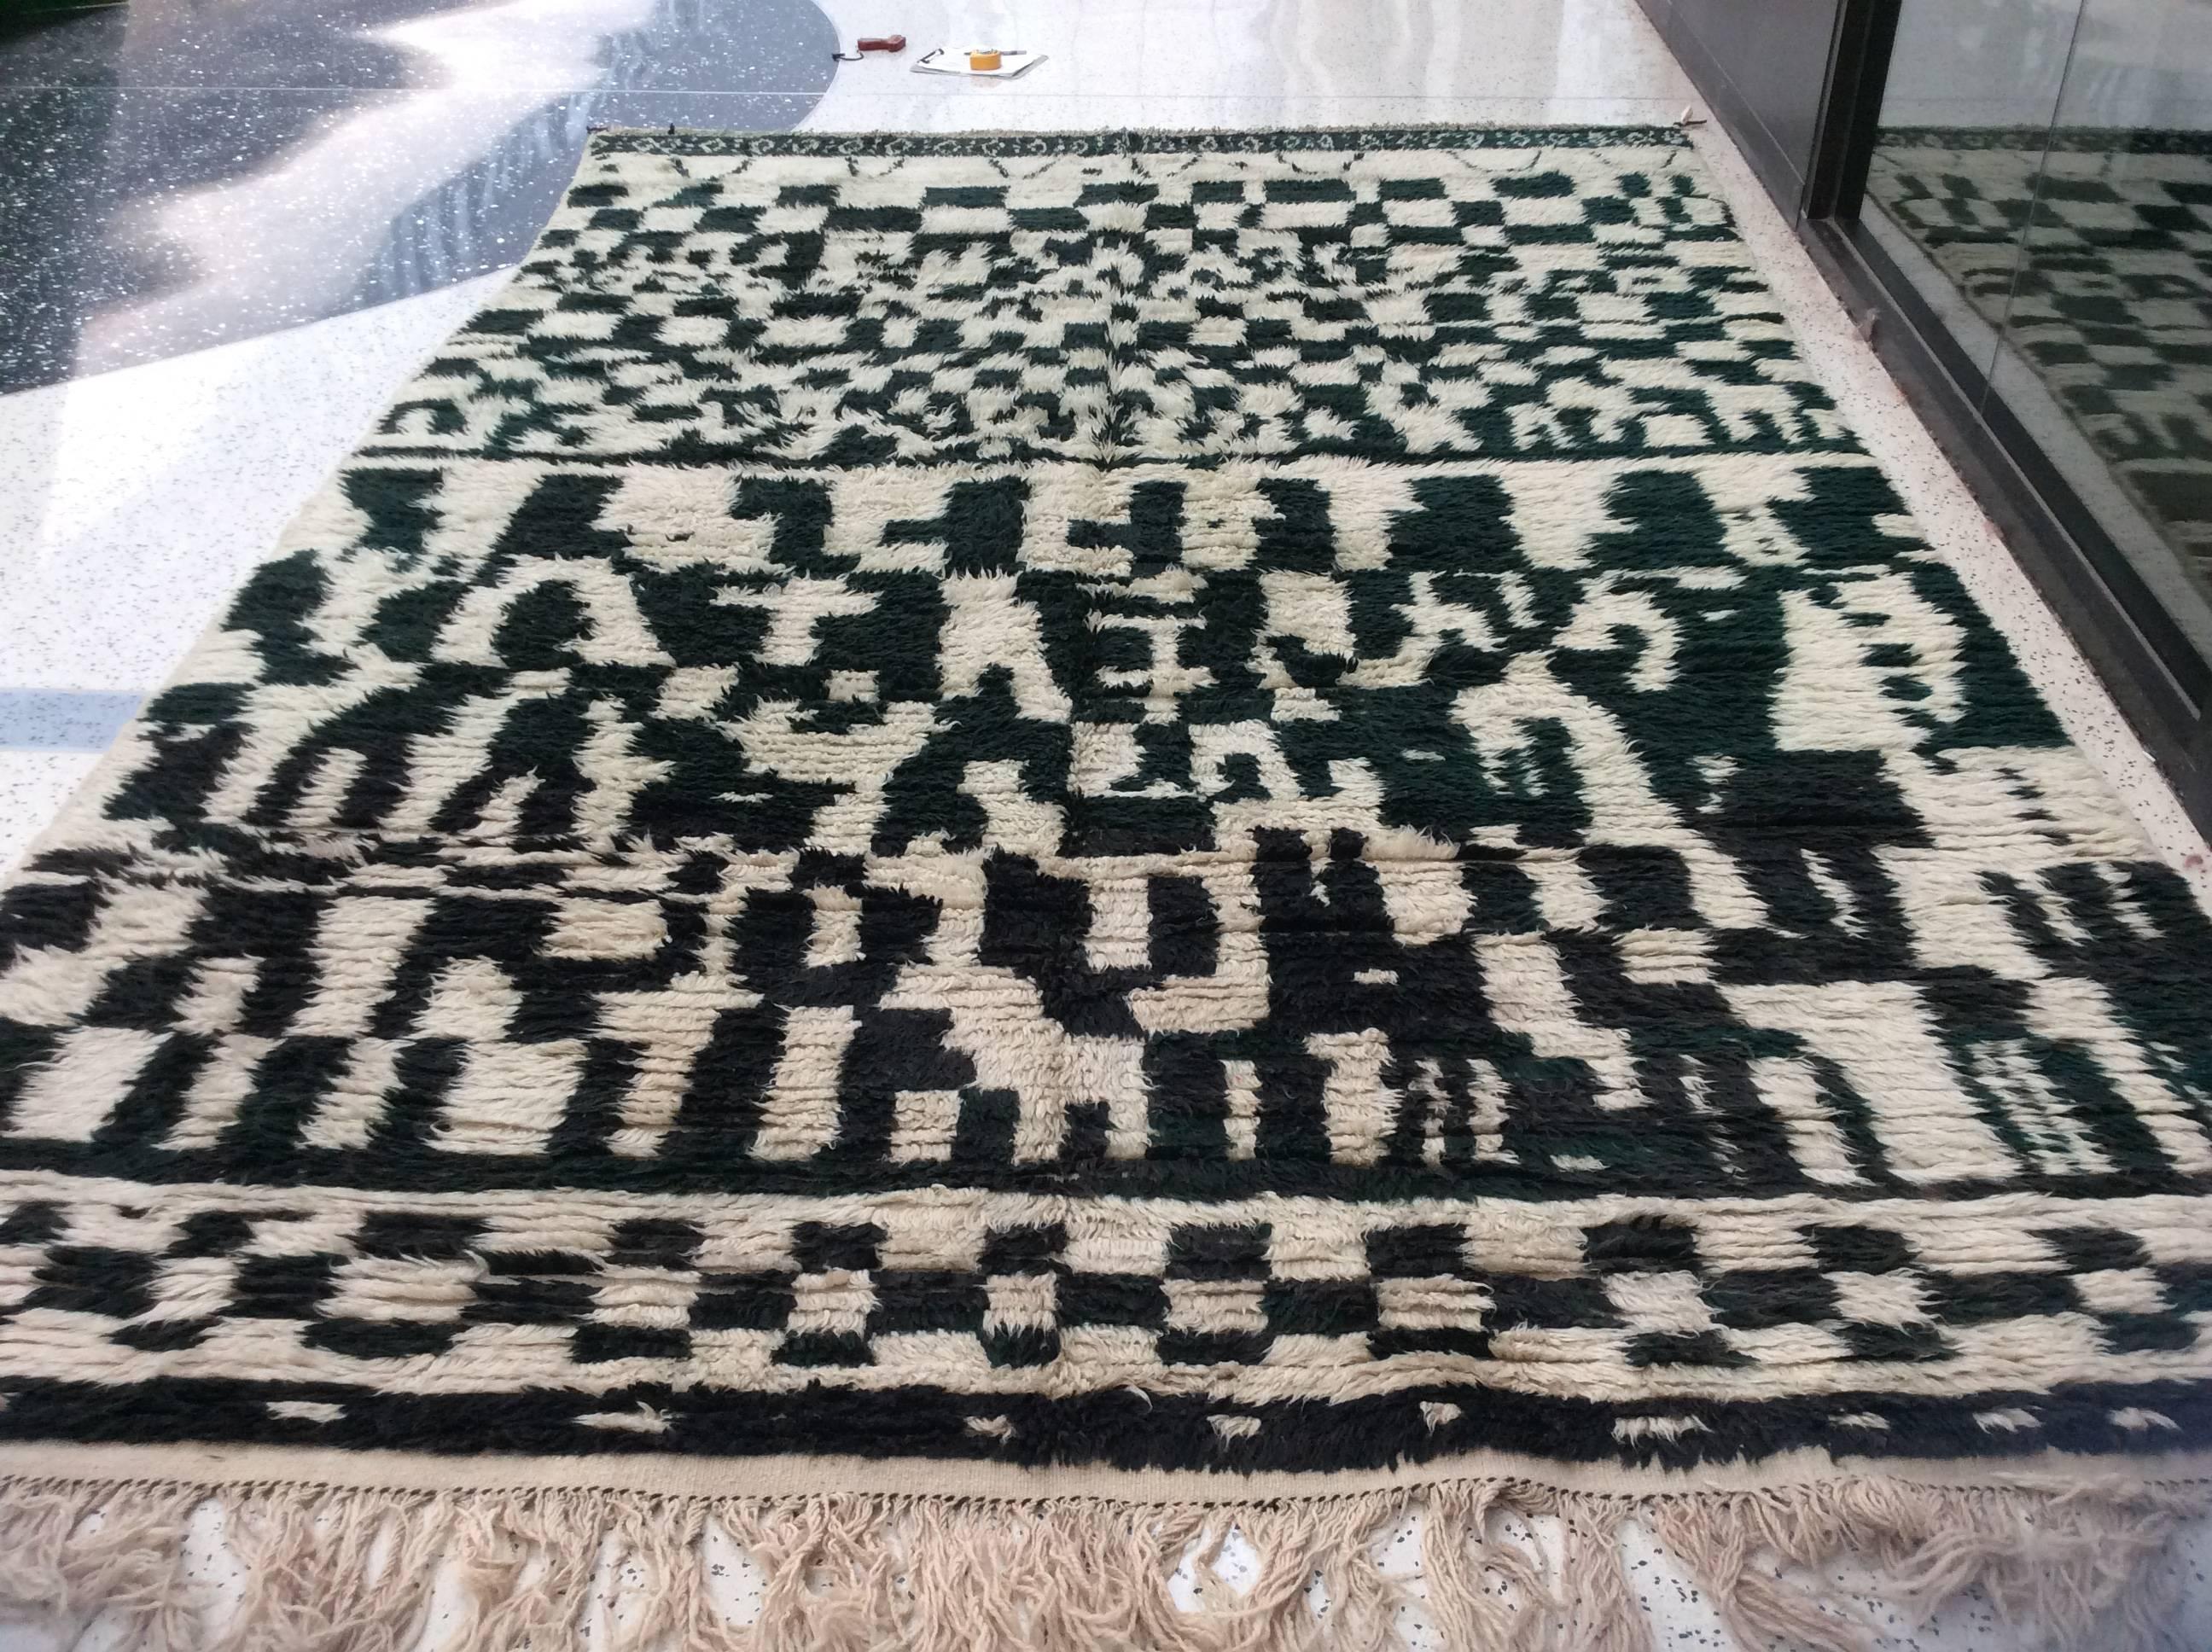 Monochrome Moroccan Rug in Black and White In Excellent Condition For Sale In Los Angeles, CA